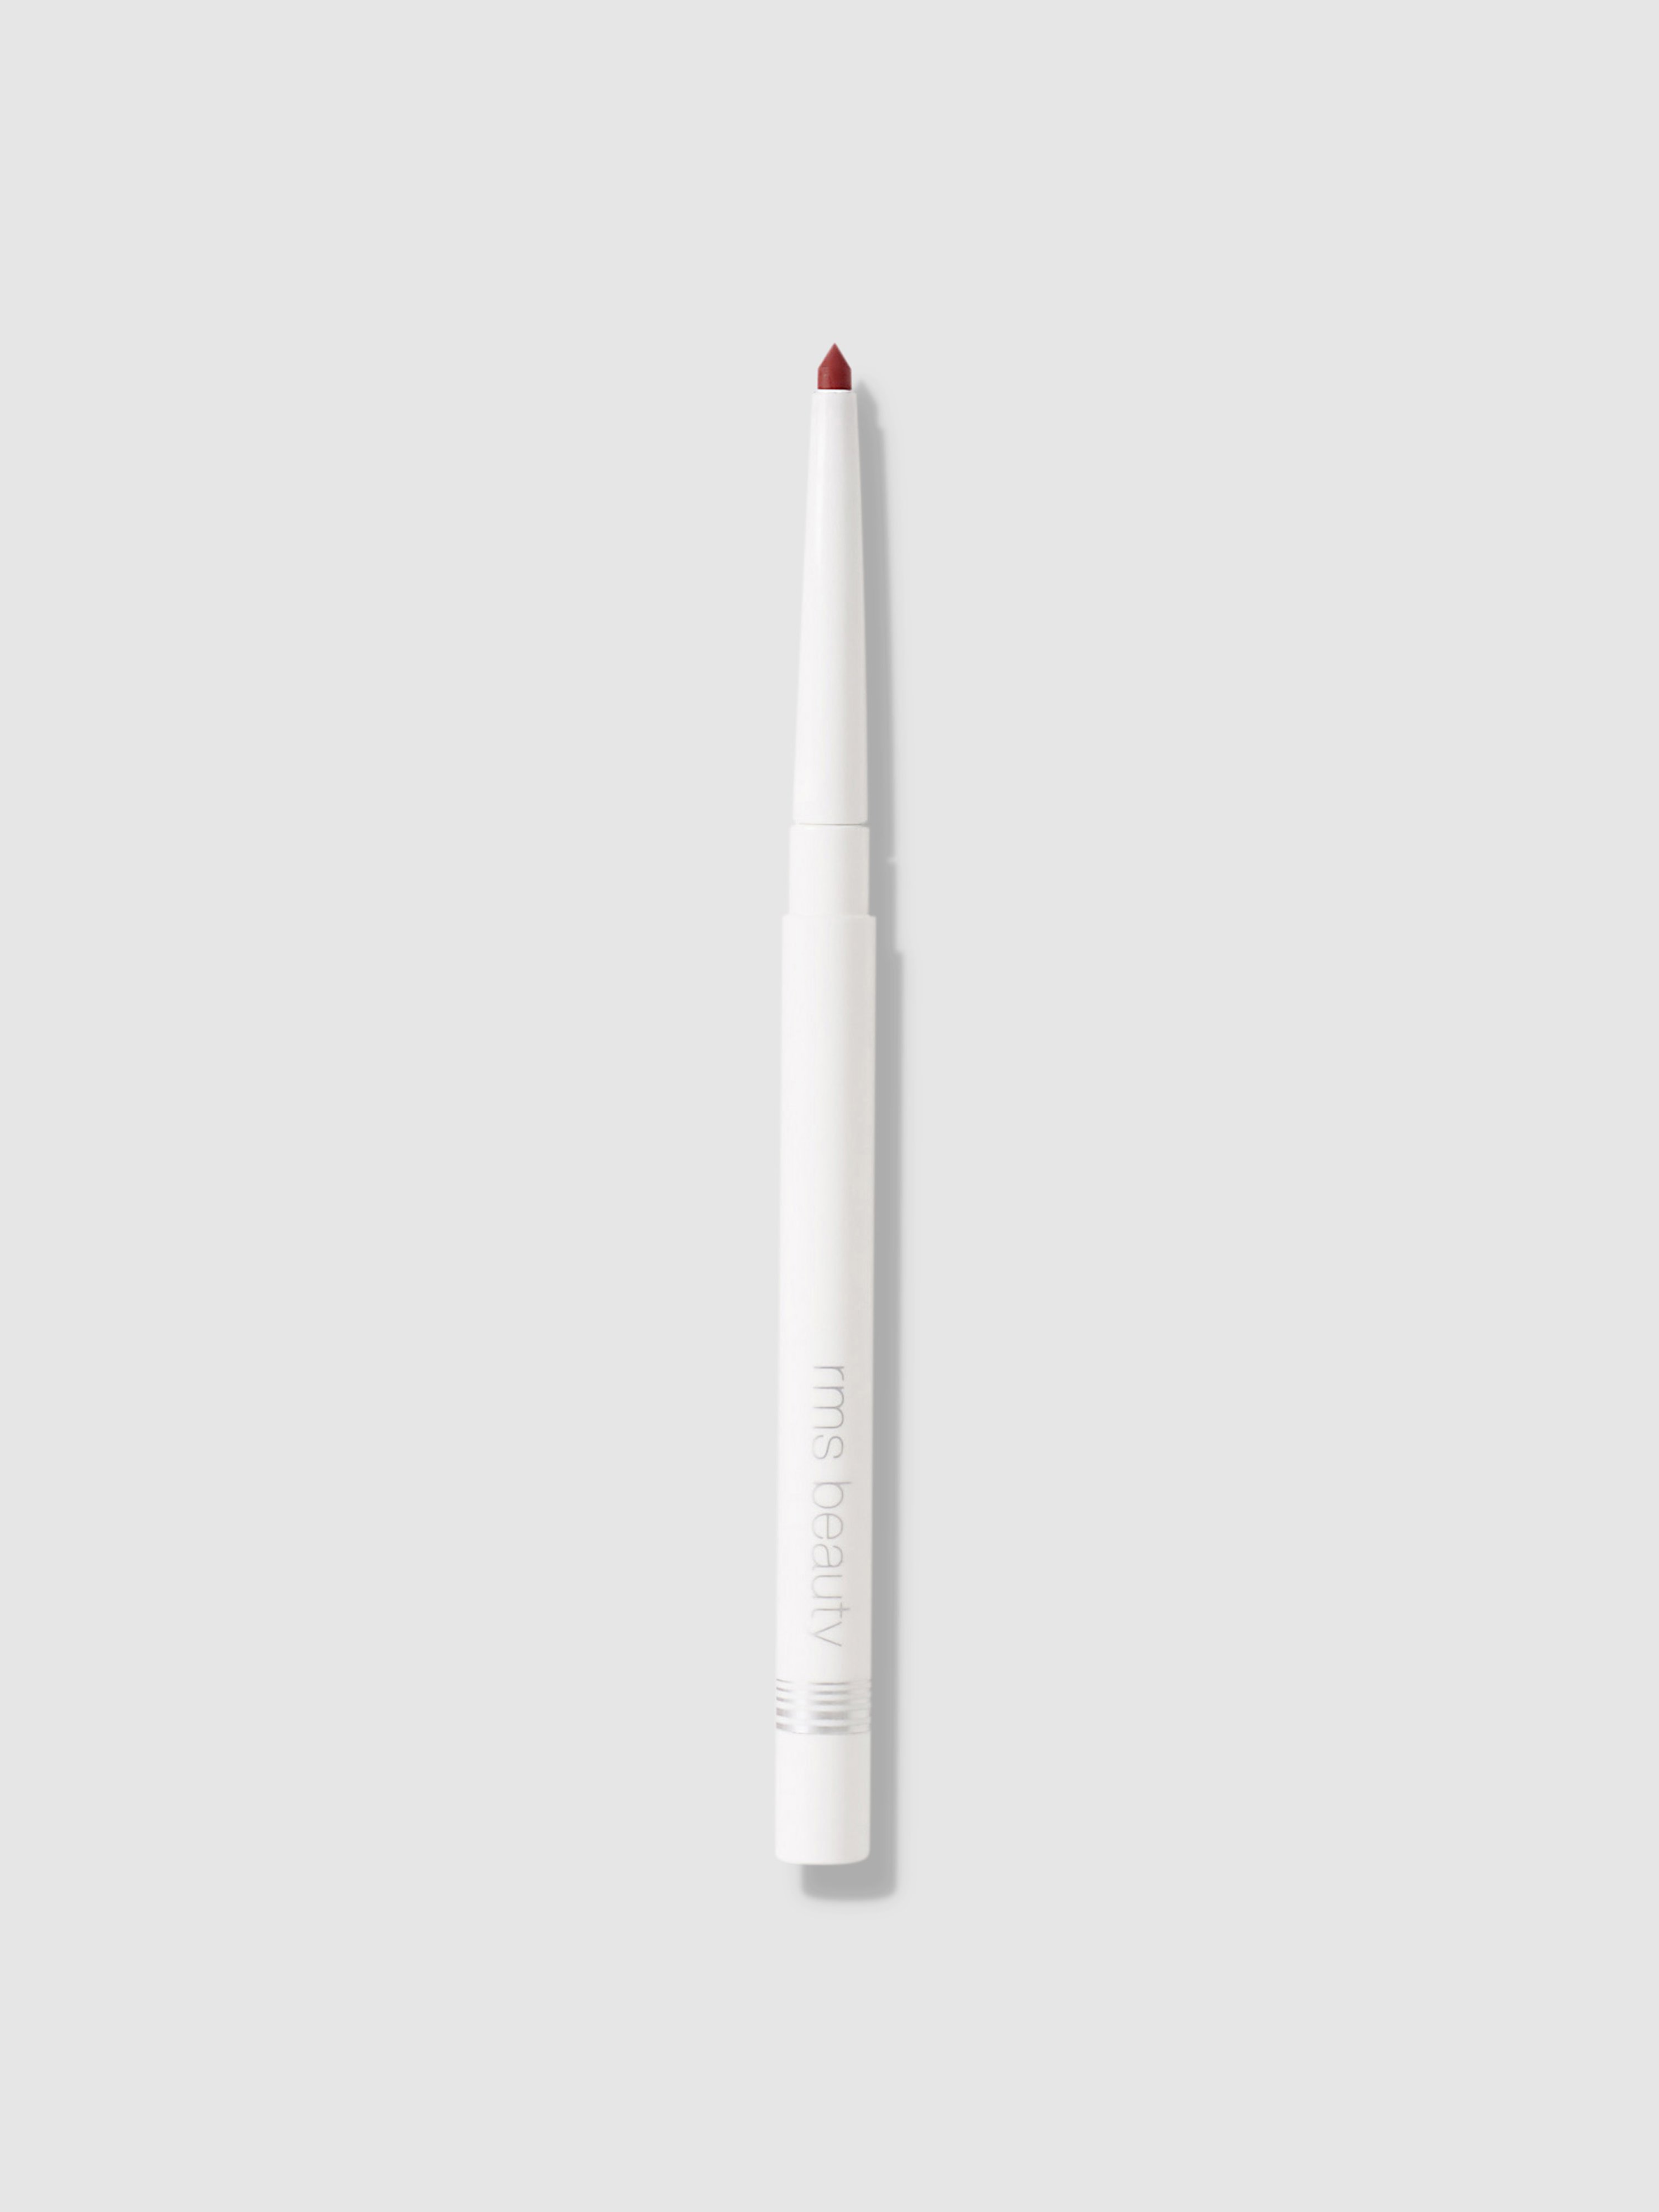 Rms Beauty Lip Liner In Dressed Up Red